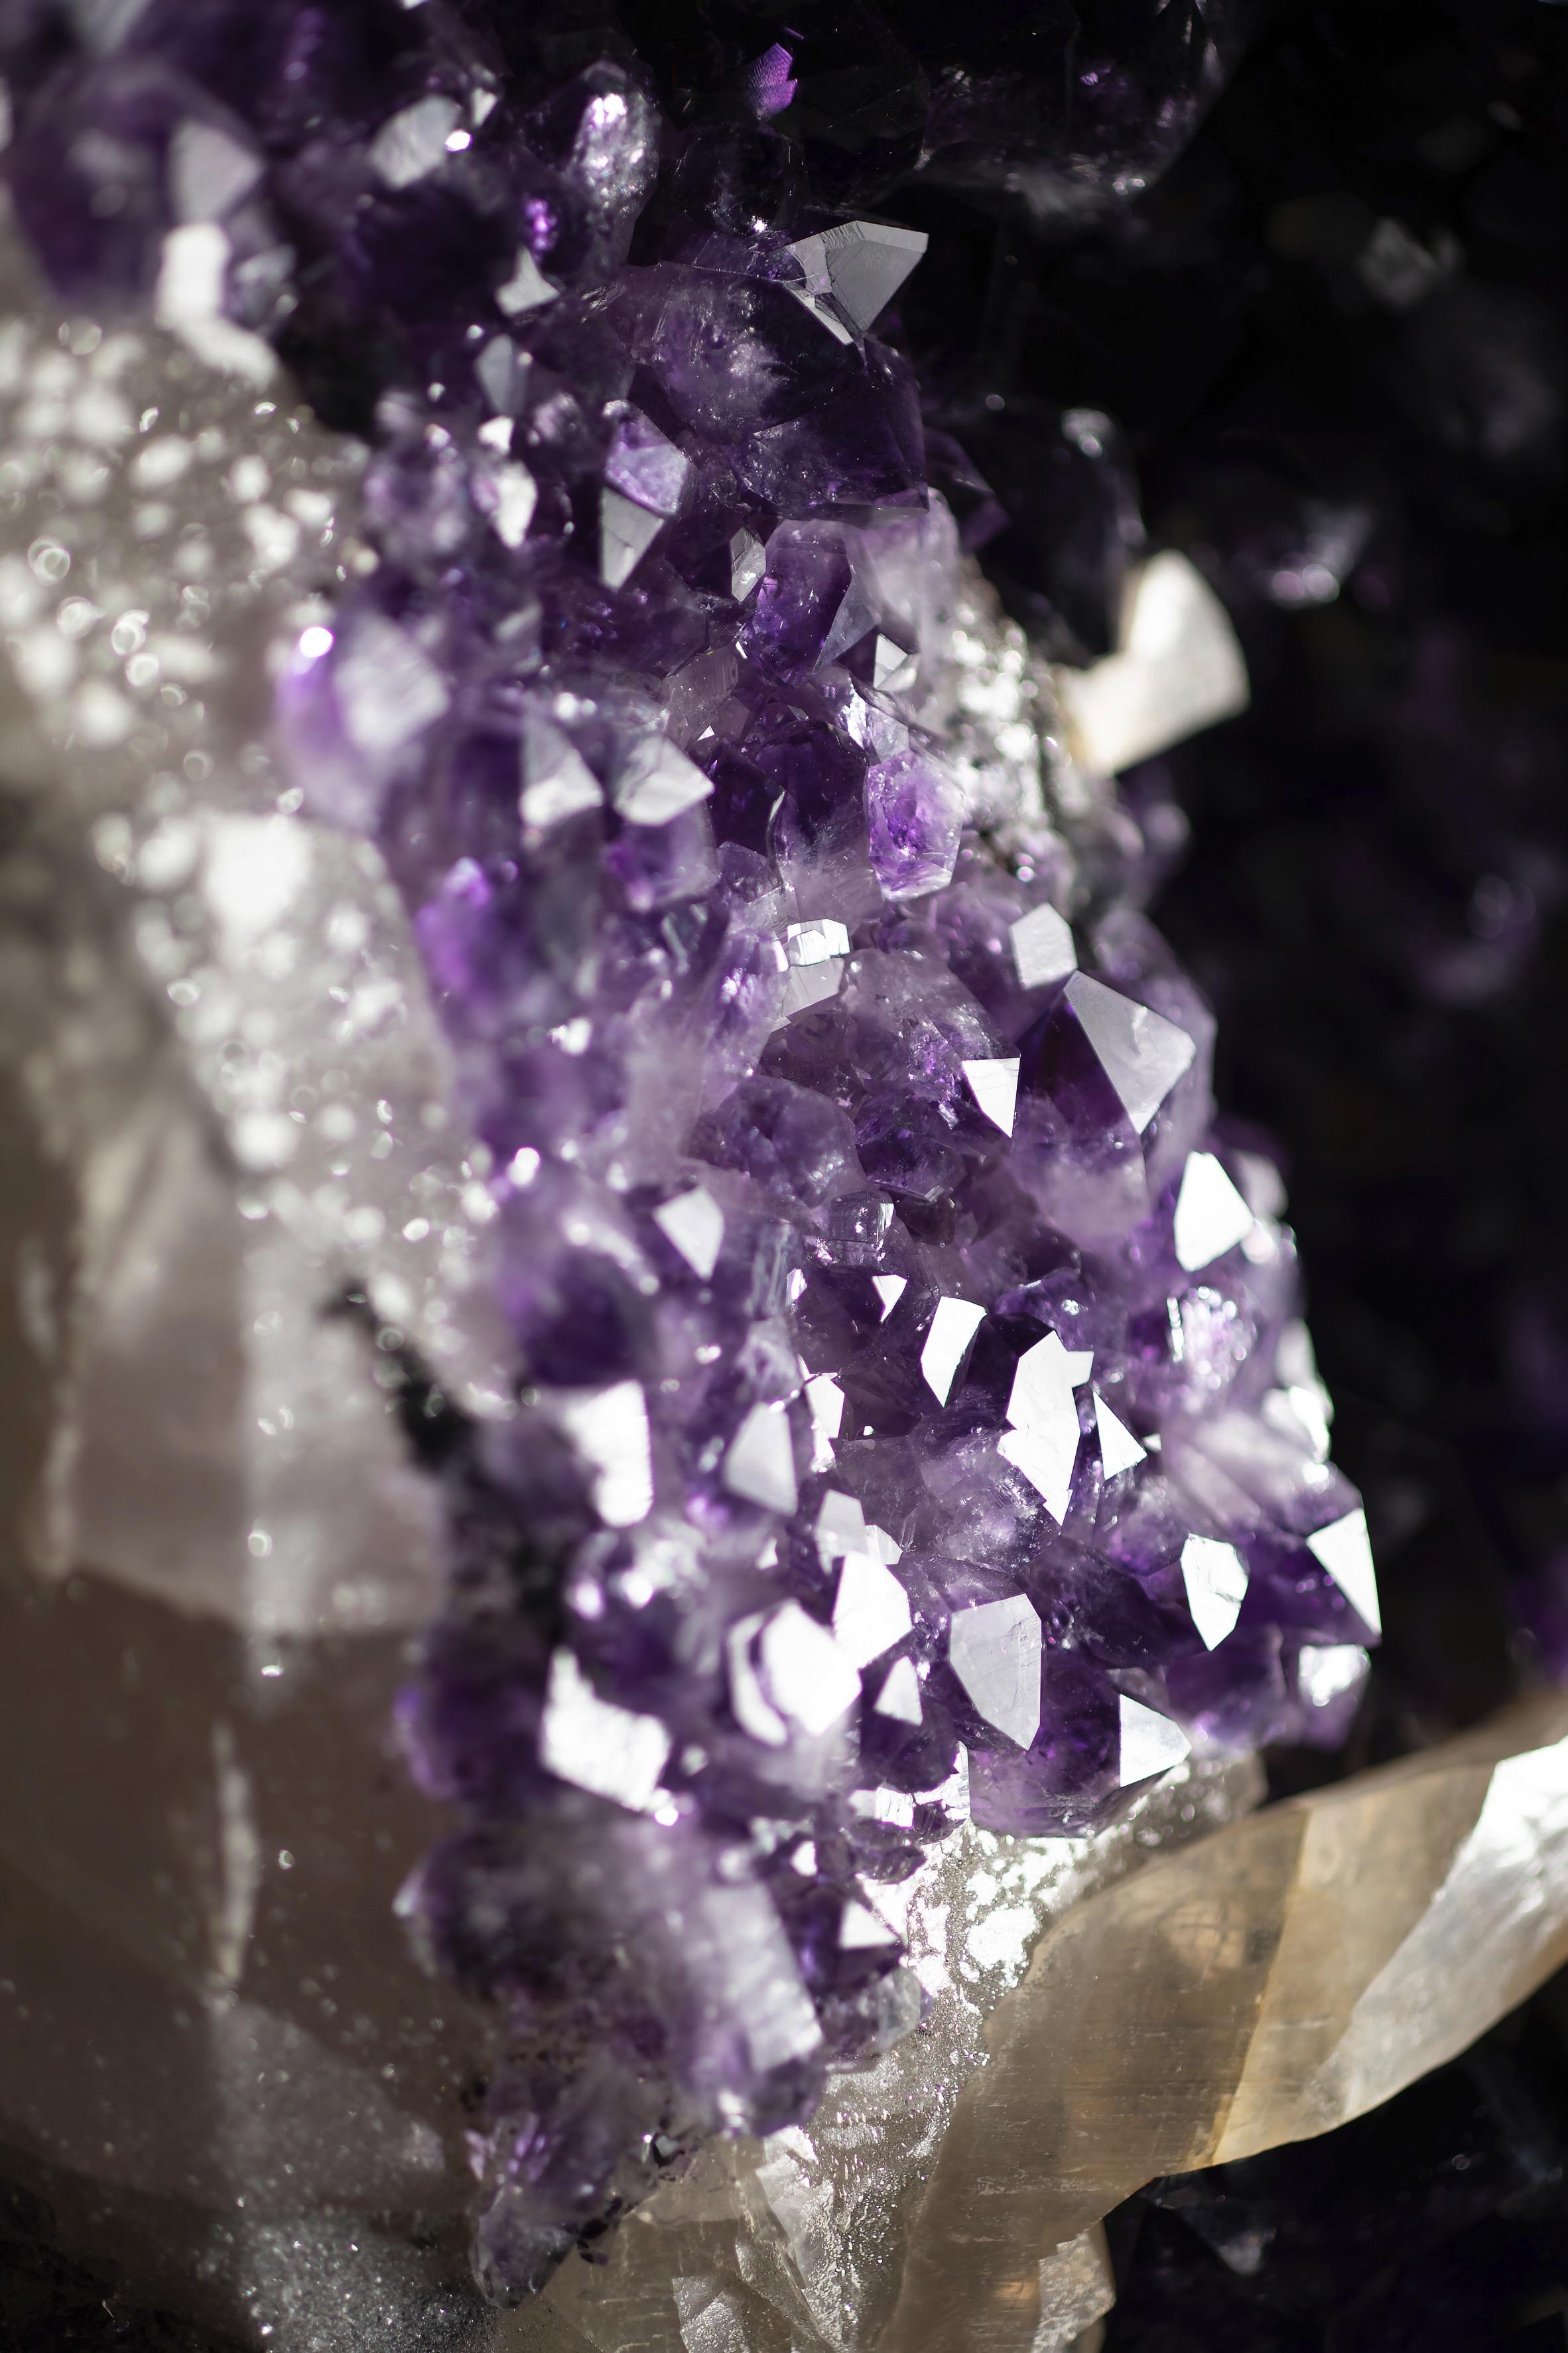 Uruguayan Large Amethyst Cluster with Calcite Formation, Hematite and White Quartz